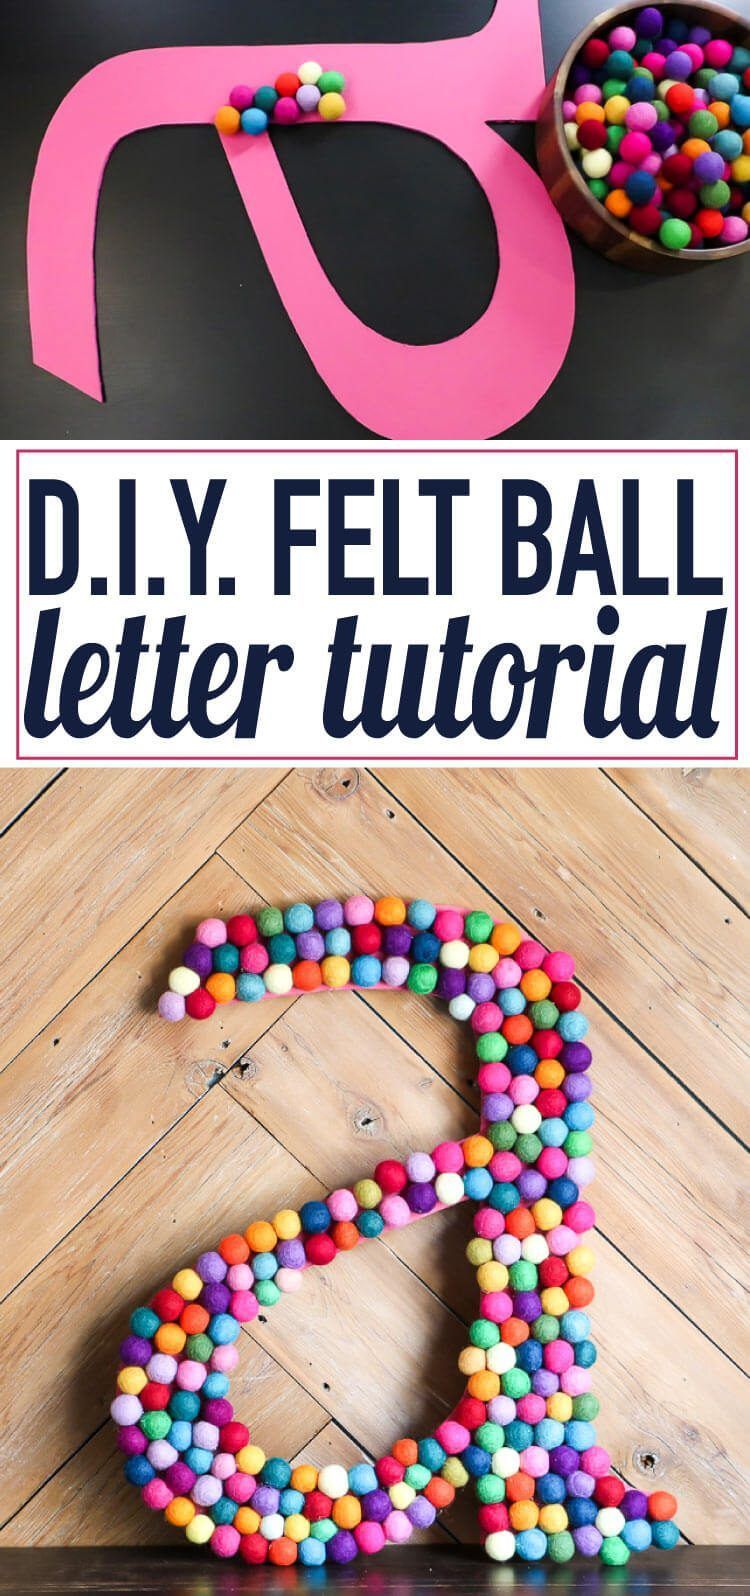 How to Make Decorative Letters for Your Walls | Designertrapped.com - How to Make Decorative Letters for Your Walls | Designertrapped.com -   18 diy Kids decor ideas